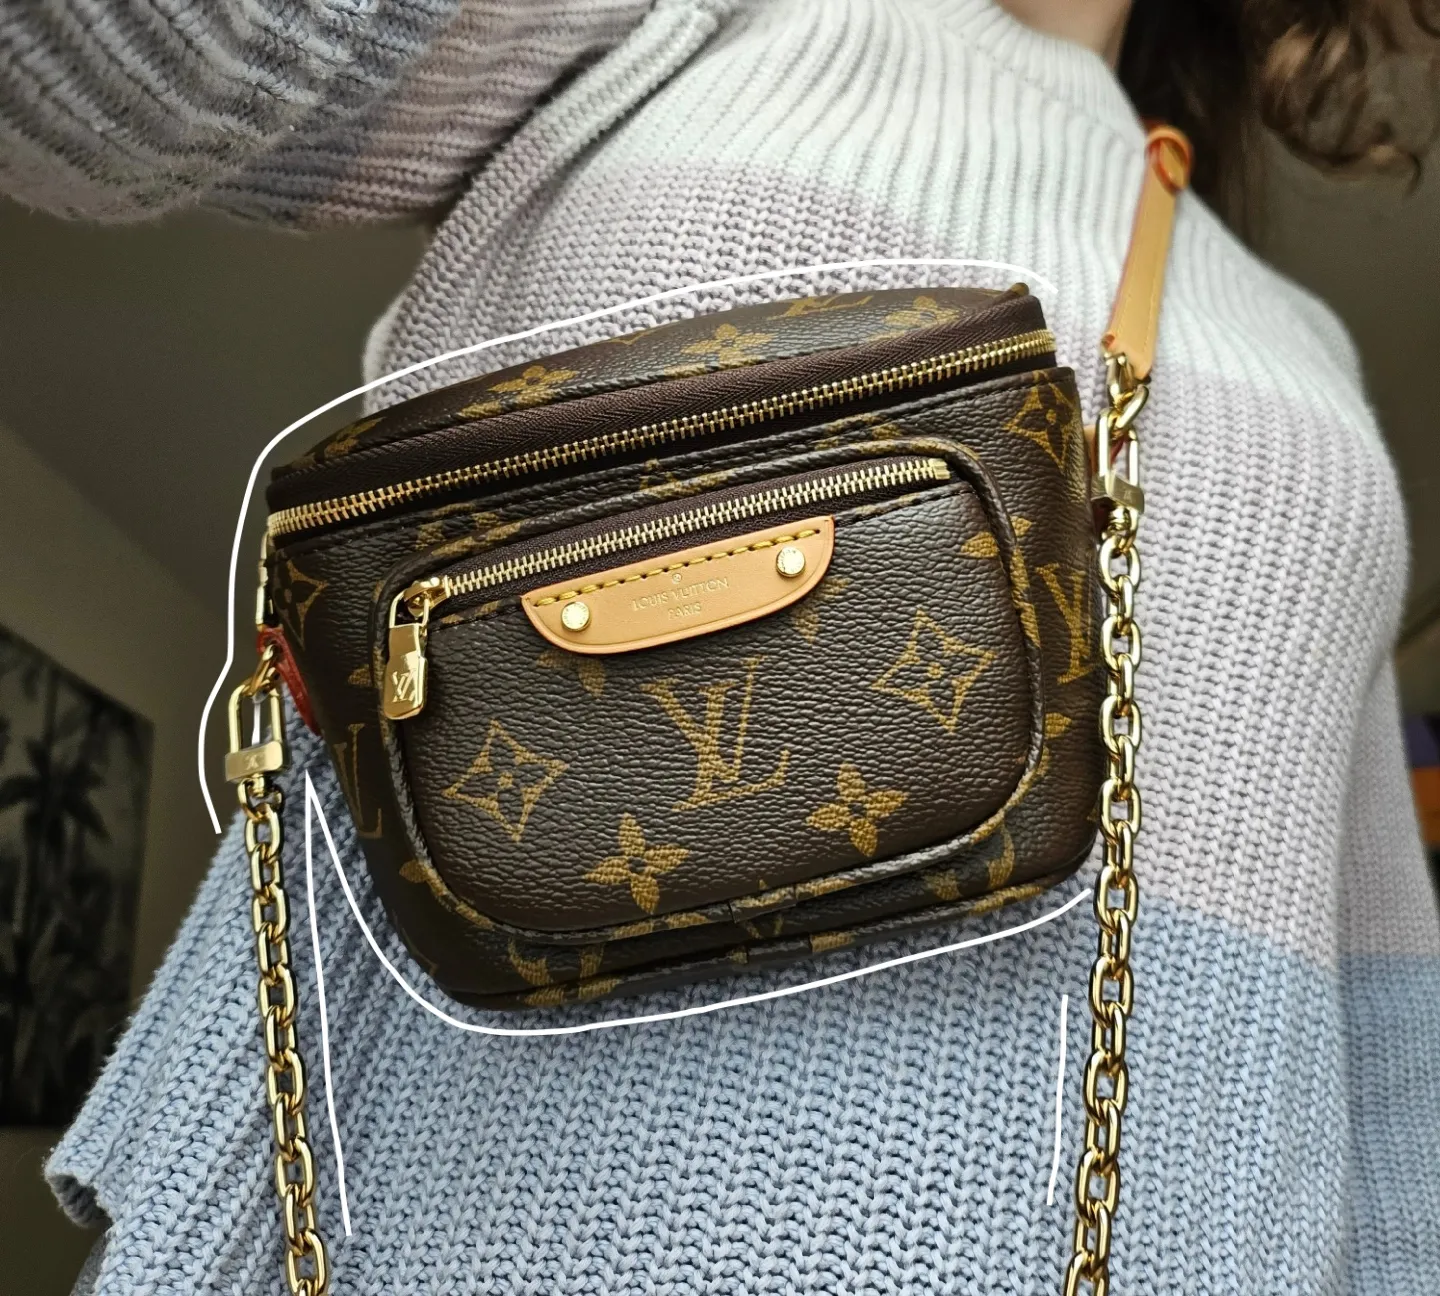 Louis Vuitton HOTTEST New Release! Is The Mini Bumbag Worth It